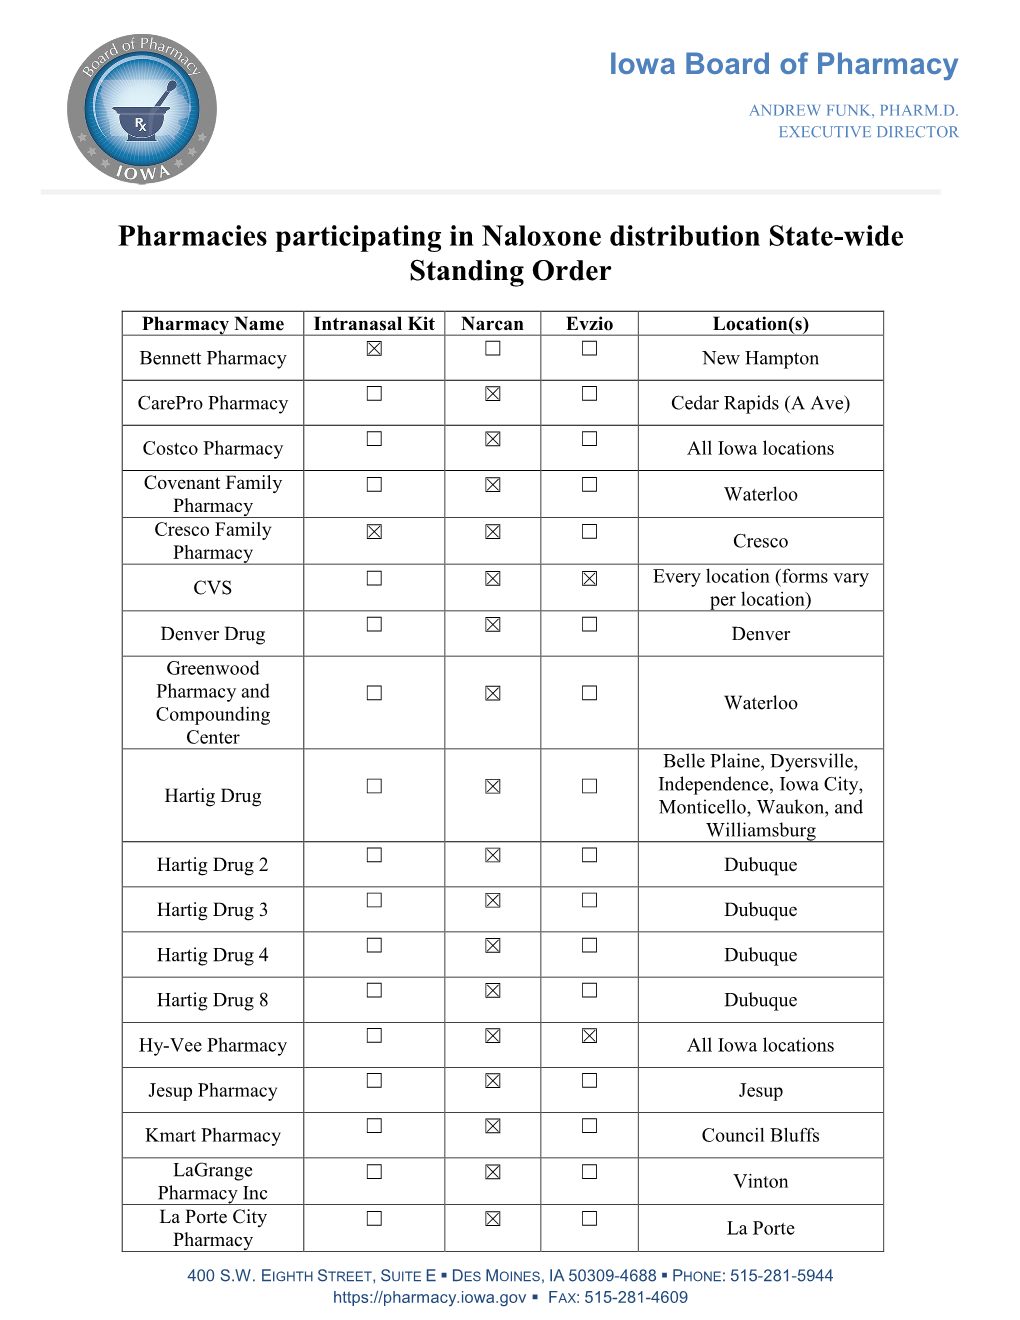 Pharmacies Participating in Naloxone Distribution State-Wide Standing Order